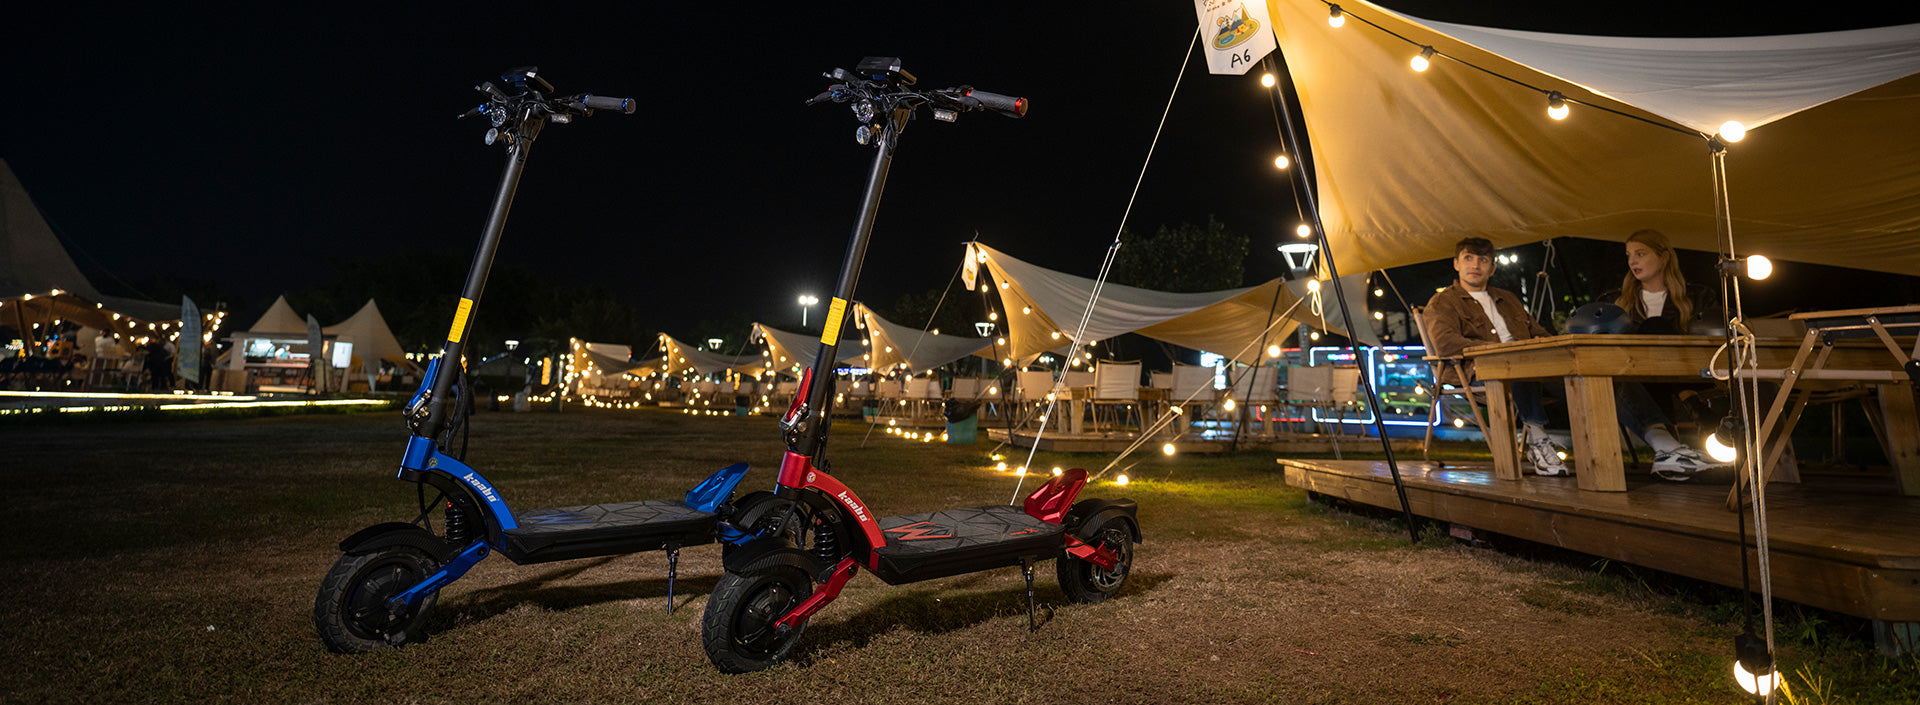 Kaabo electric scooters parked at a vibrant outdoor evening event, highlighting the social and portable lifestyle with electric mobility.